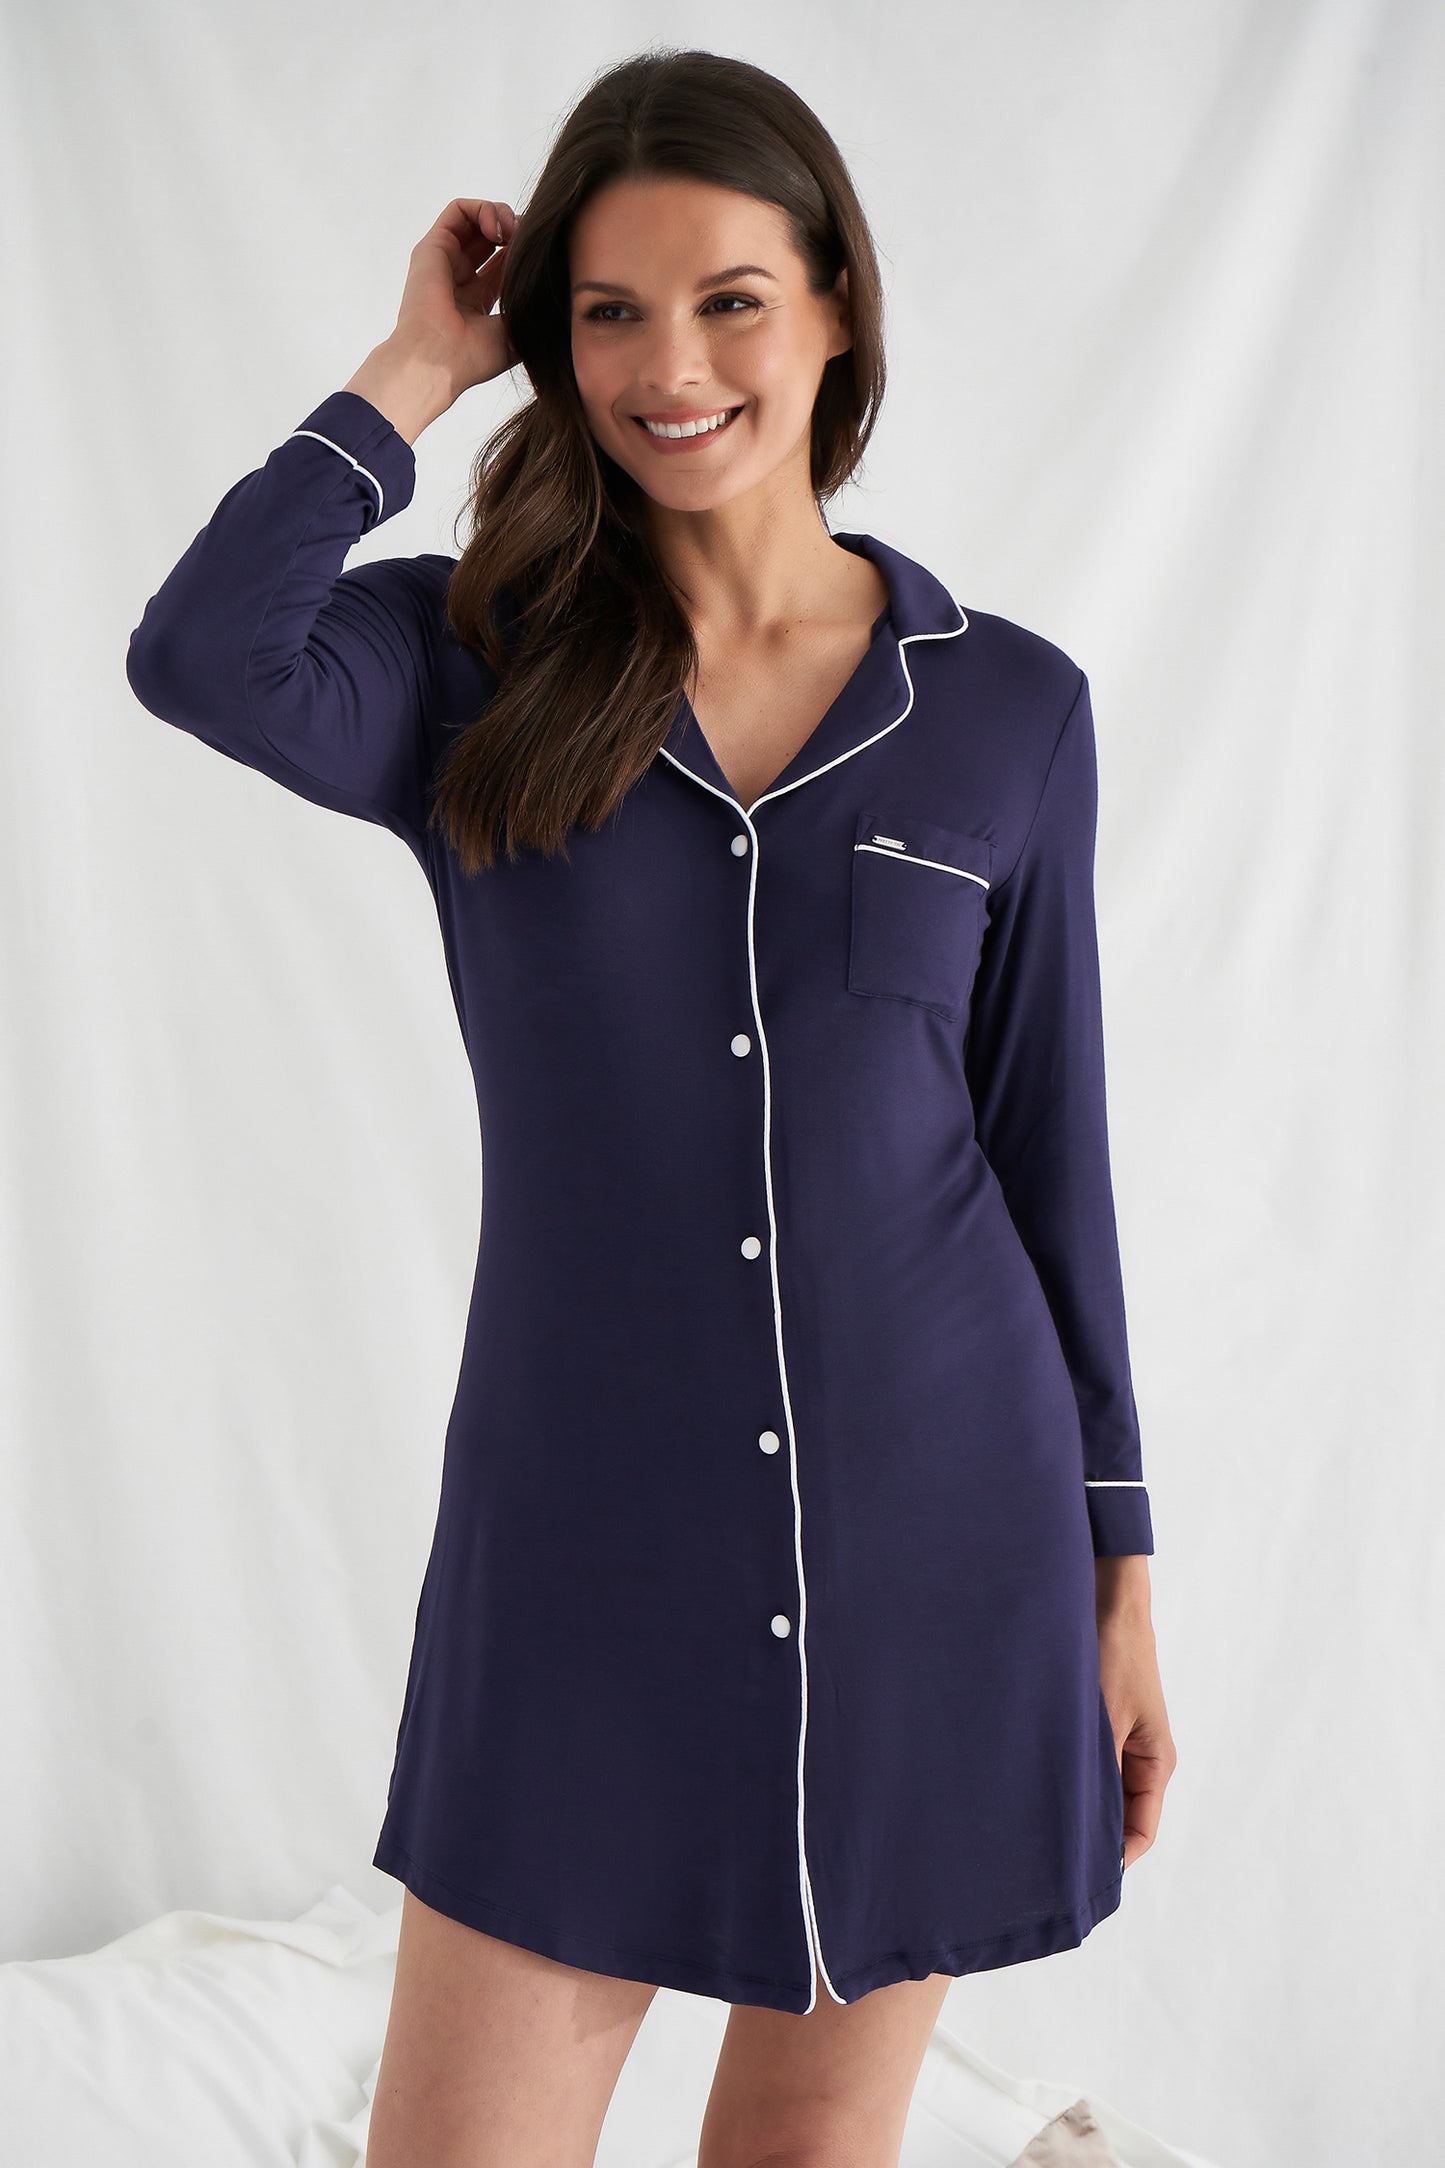 
                  
                    Women's Bamboo Nightshirt in Midnight Blue with functional button up fastening, revere collar and contrast colour piping from Pretty You London
                  
                